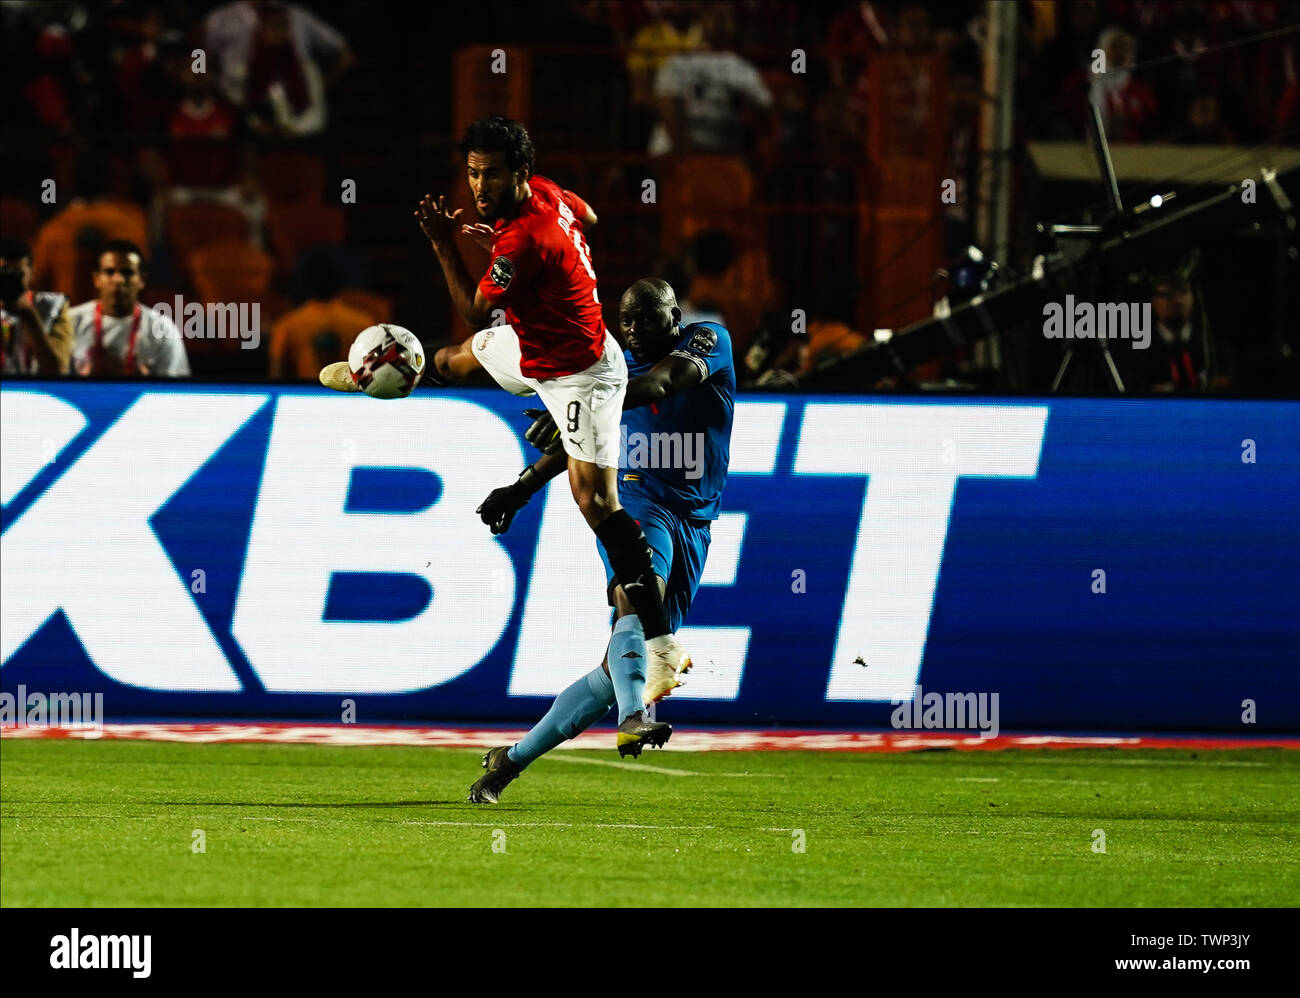 Cairo, Egypt. 21st June, 2019. Edmore Sibanda of Zimbabwe clearing the ball in front of Marwan Mohsen Fahmy Tharwat of Egypt during the African Cup of Nations match between Egypt and Zimbabwe at the Cairo International Stadium in Cairo, Egypt. Ulrik Pedersen/CSM/Alamy Live News Stock Photo